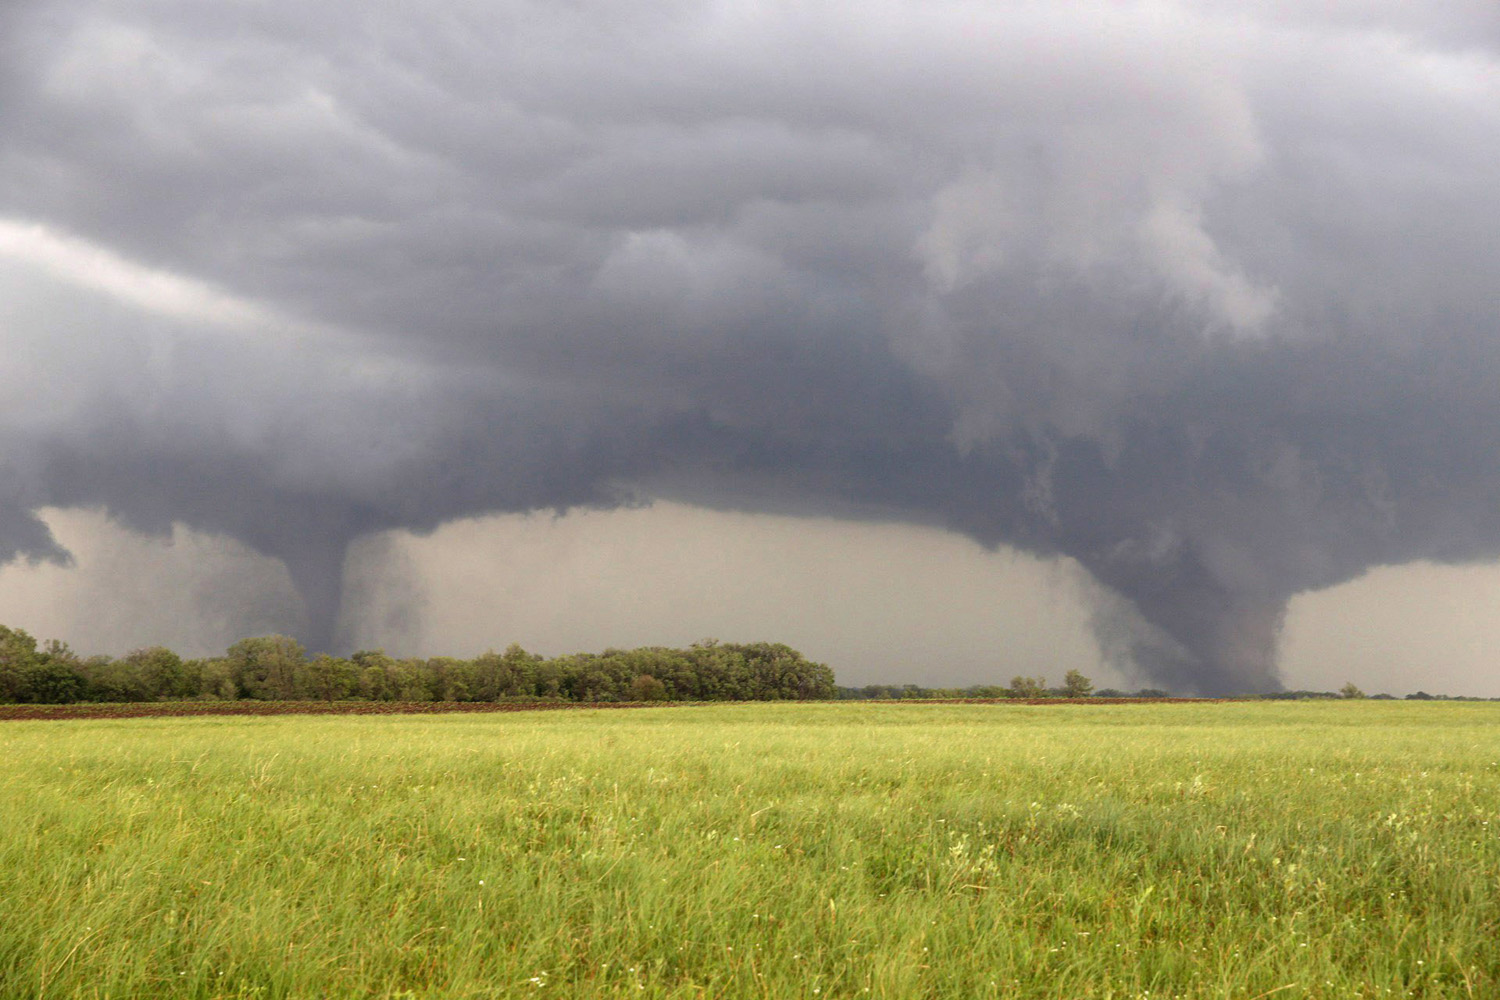 Jun. 16, 2014. Two tornados approach  Pilger, Neb., Monday  The National Weather Service said at least two twisters touched down within roughly a mile of each other Monday in northeast Nebraska.